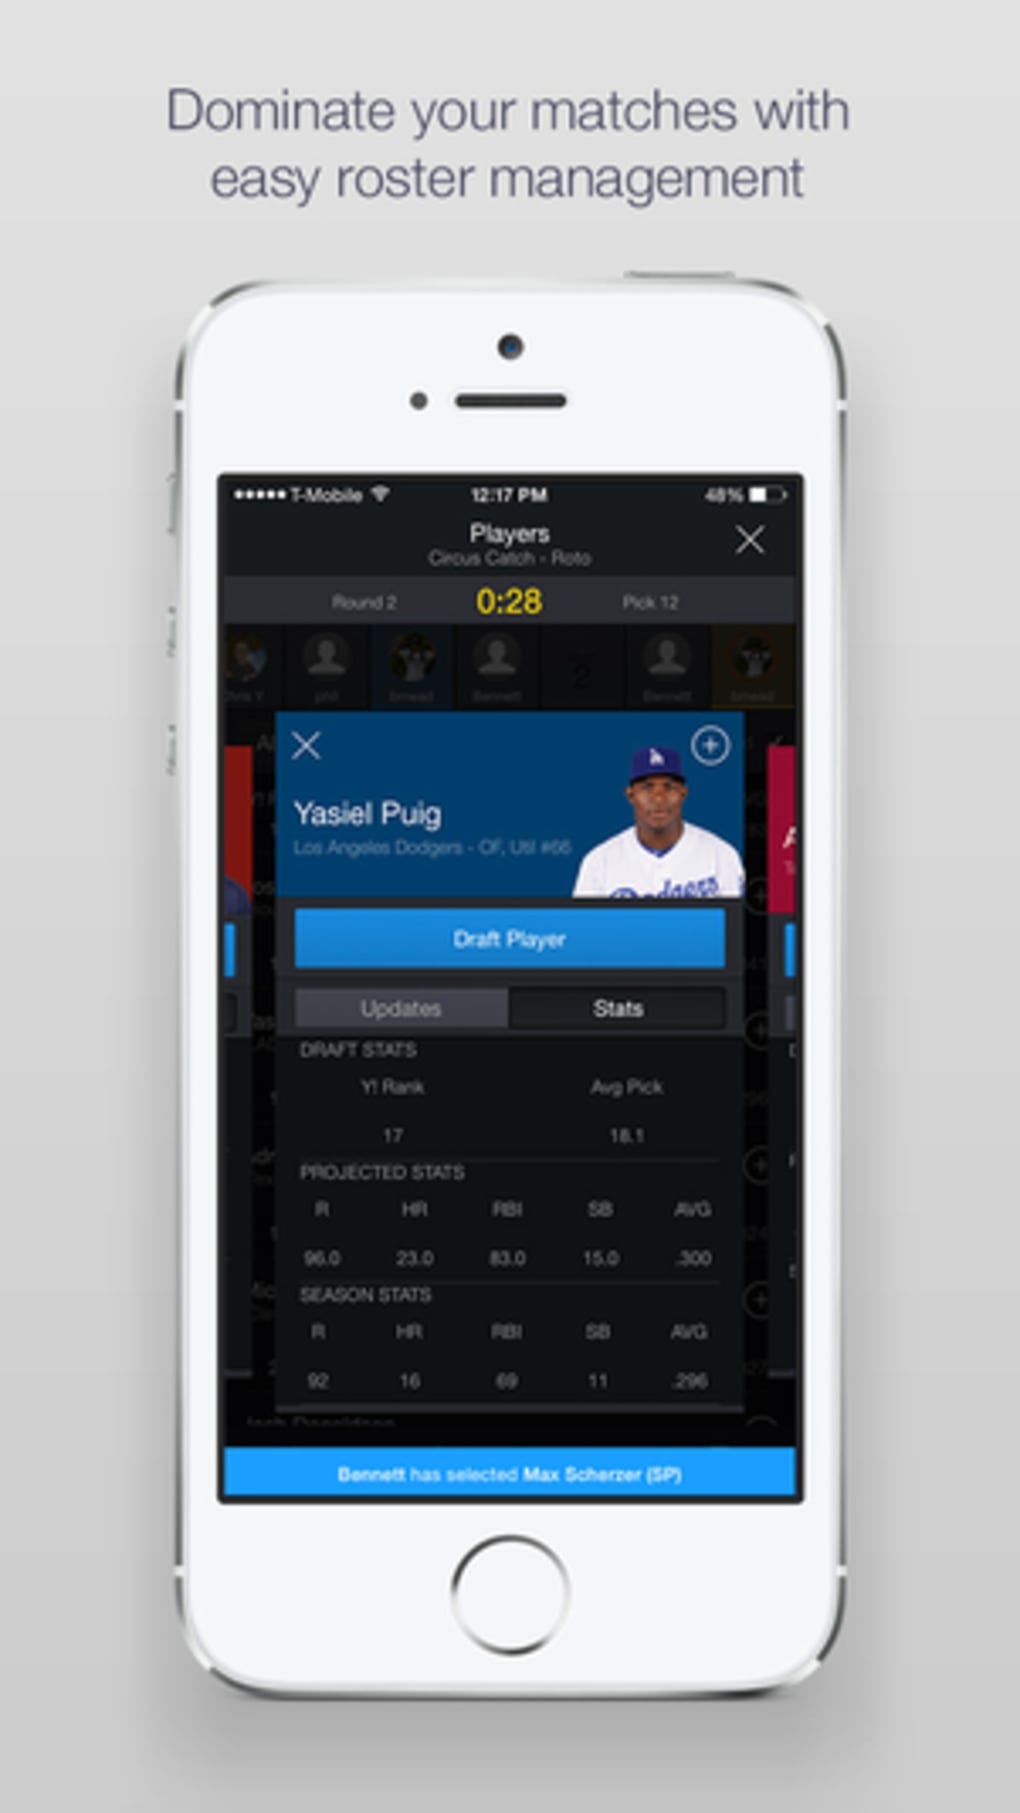 35 Best Photos Yahoo Fantasy Football App Download - 5 Awesome Football Apps for the iPhone and iPad